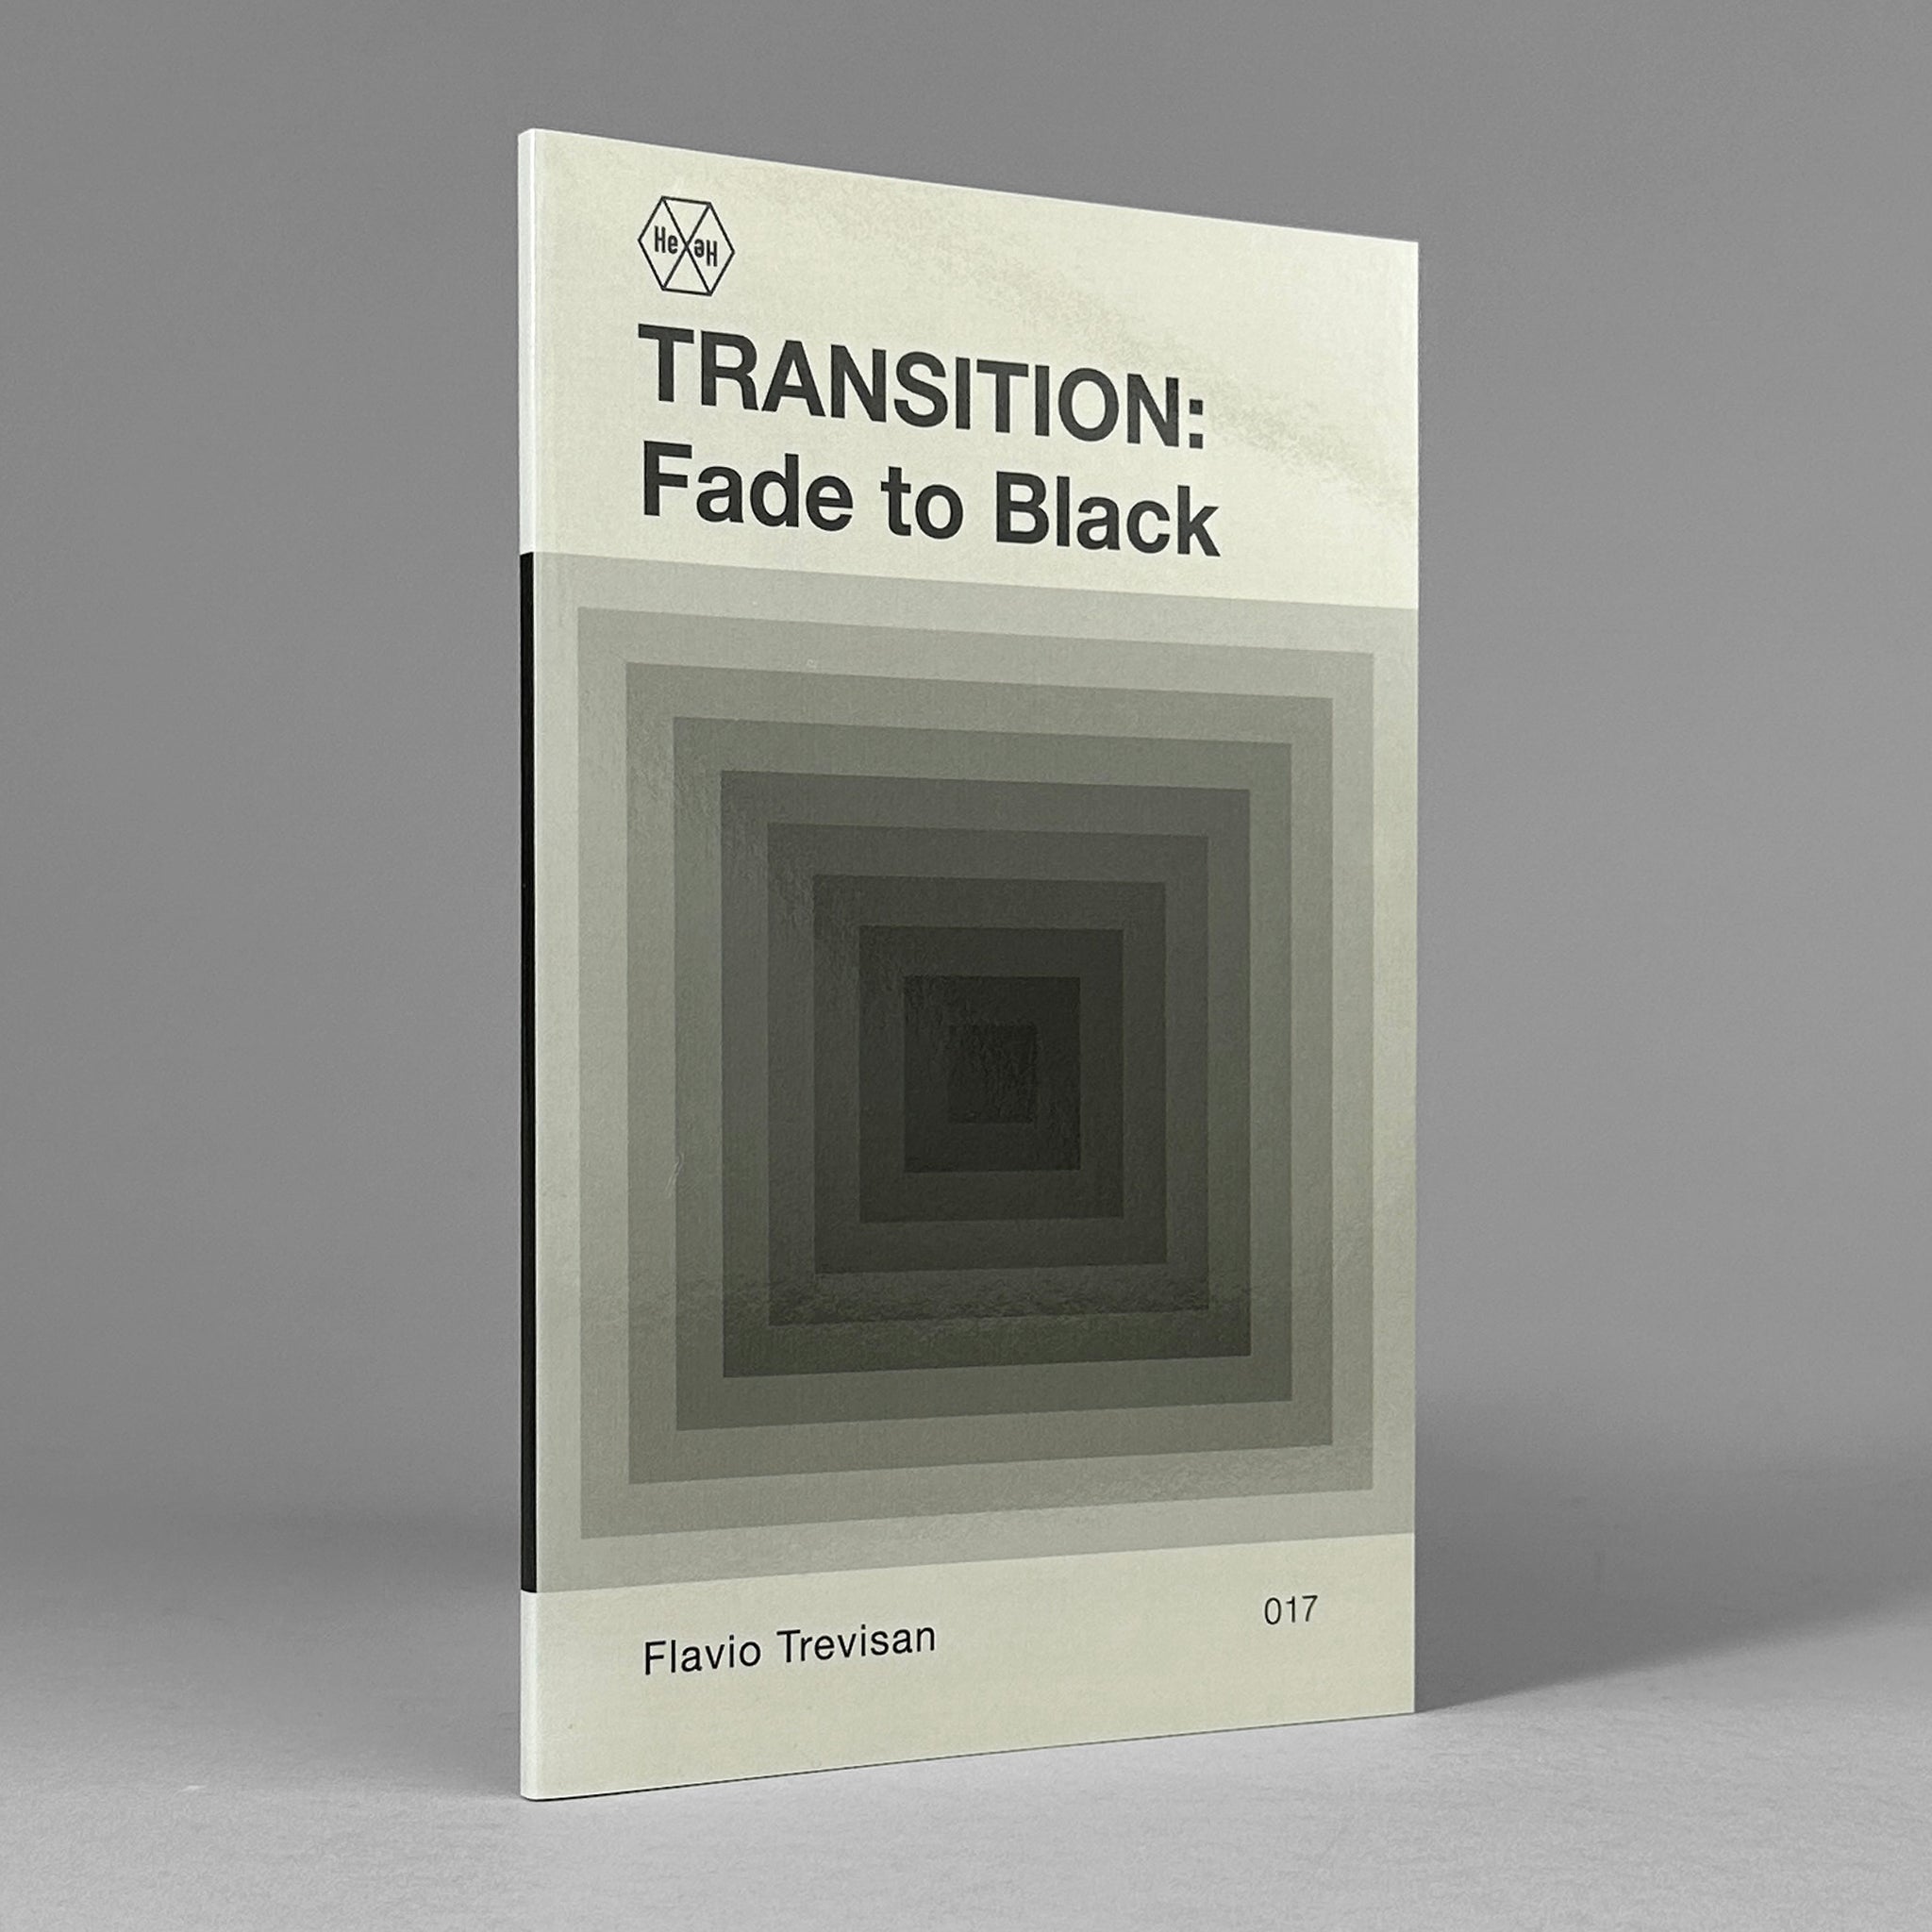 TRANSITION: Fade to Black